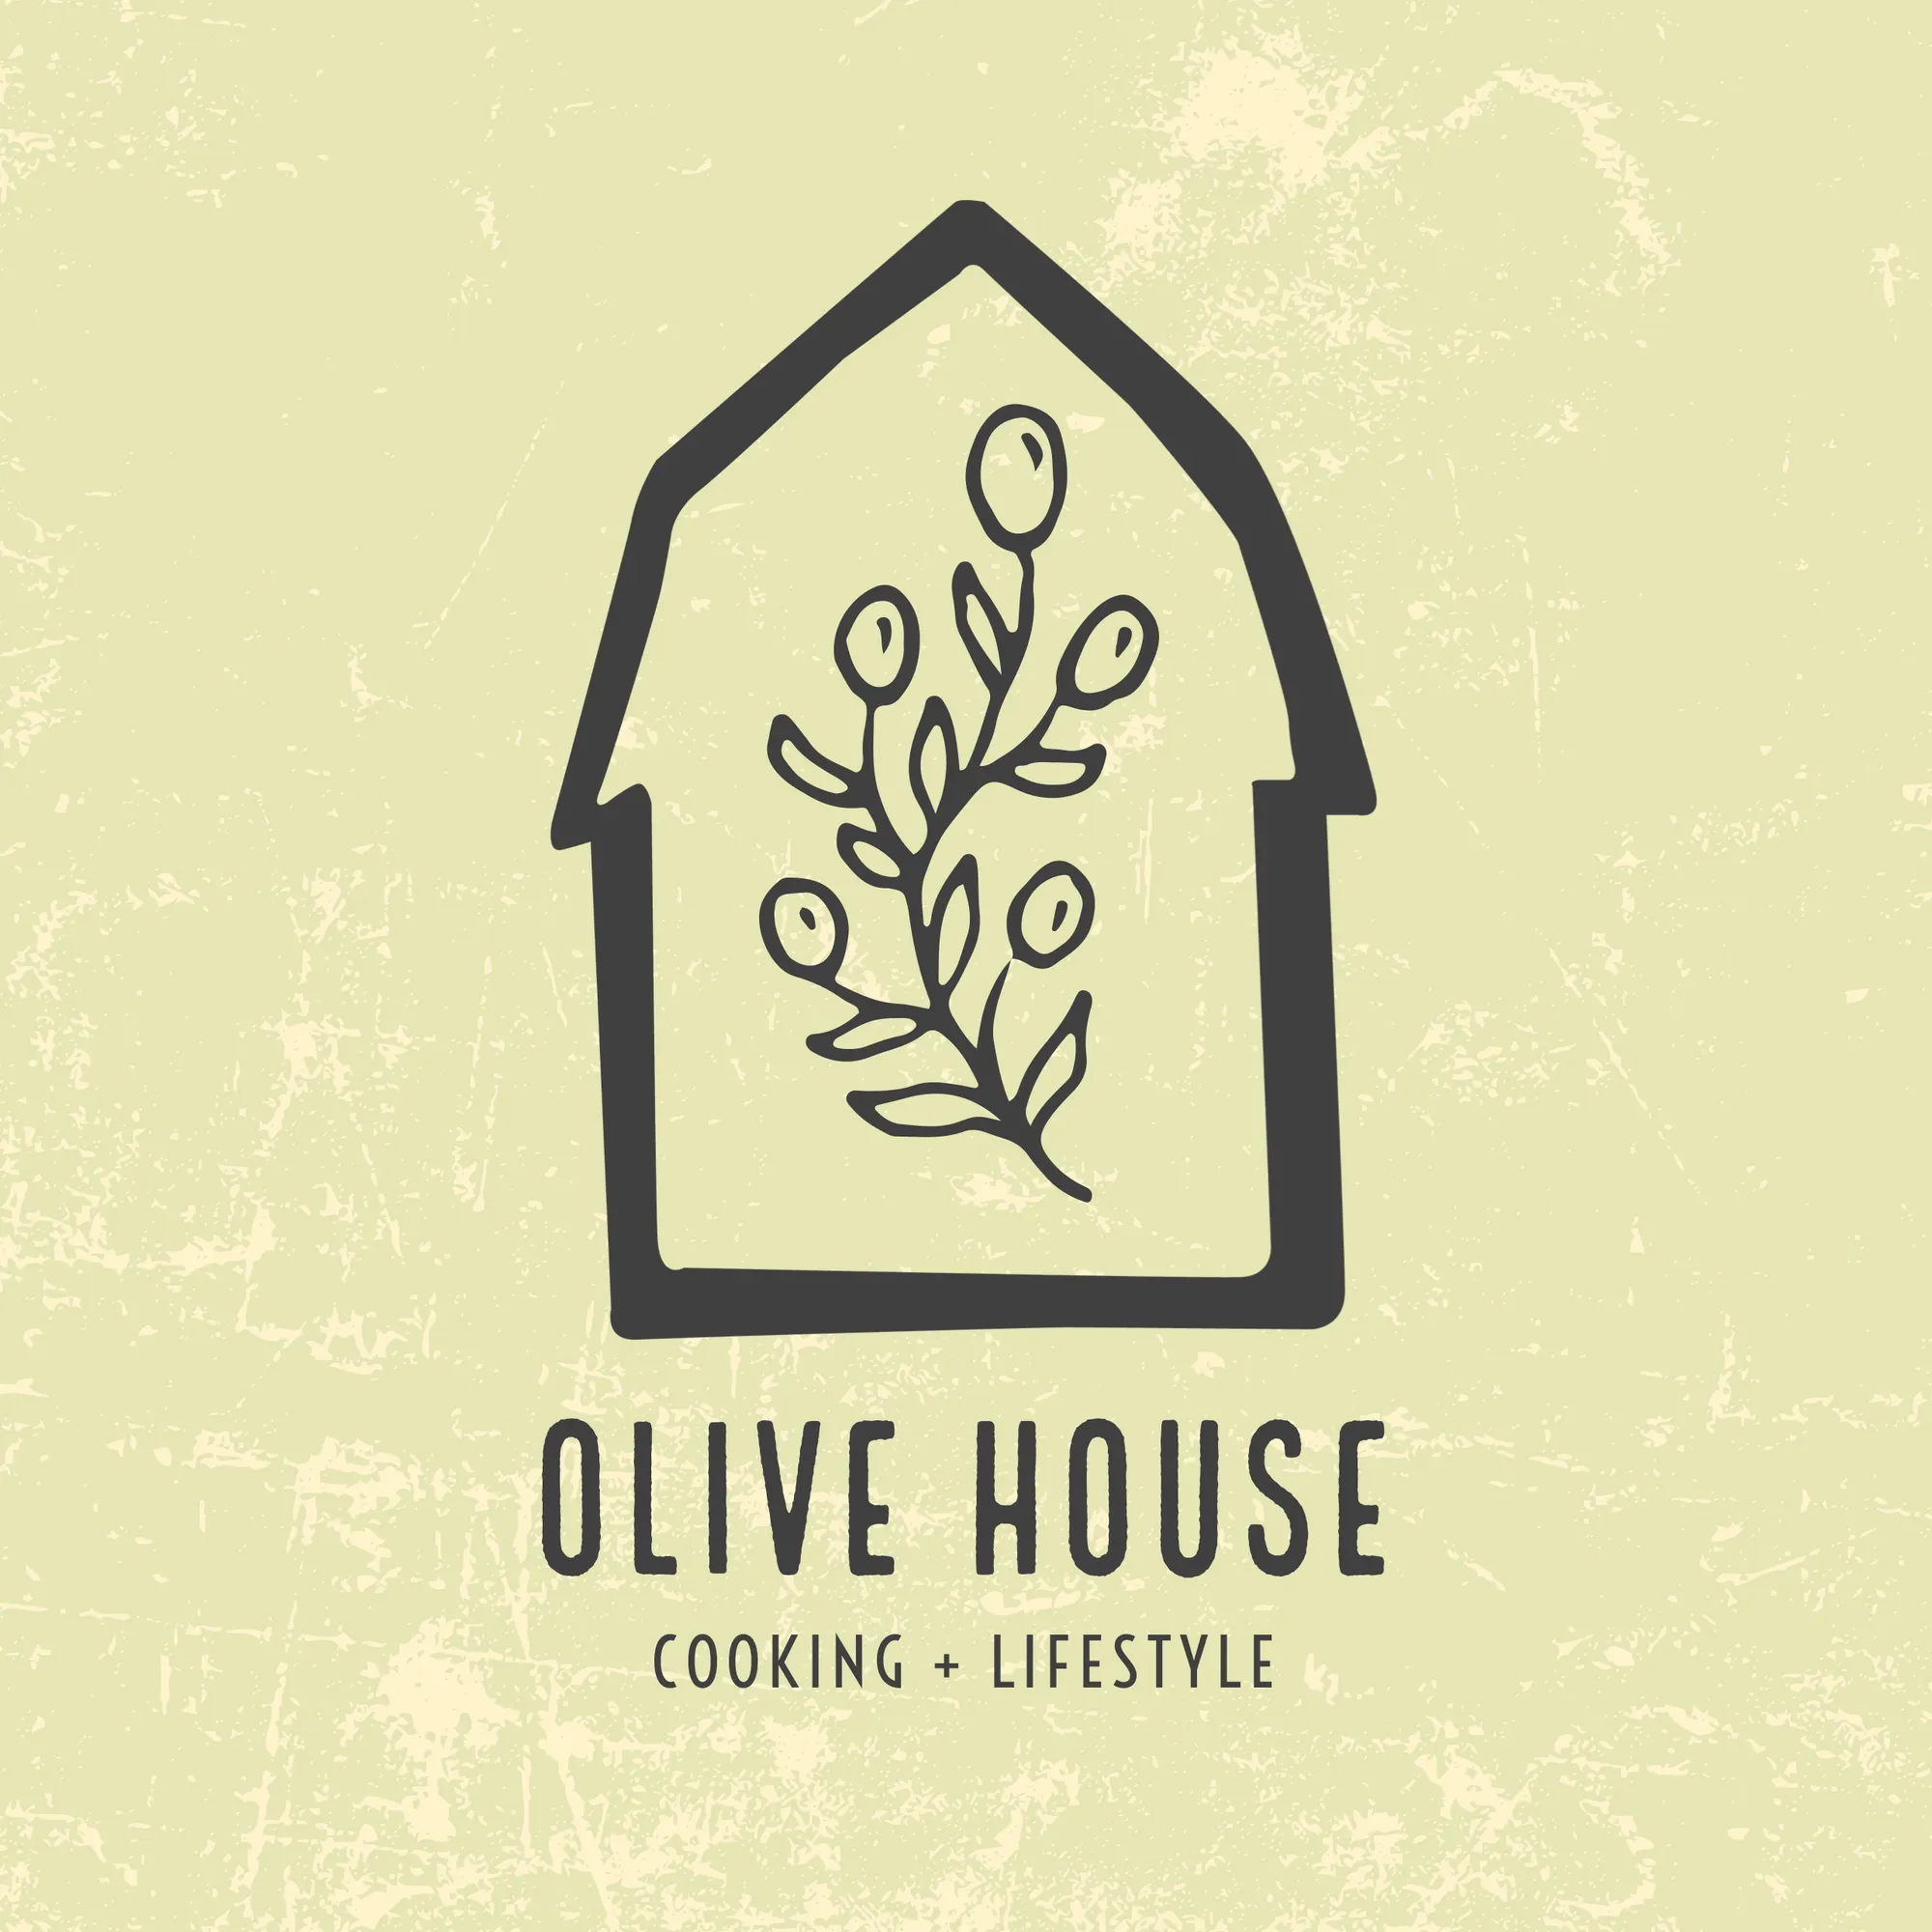 Green and Black Olive House Cooking and Lifestyle Logo Square